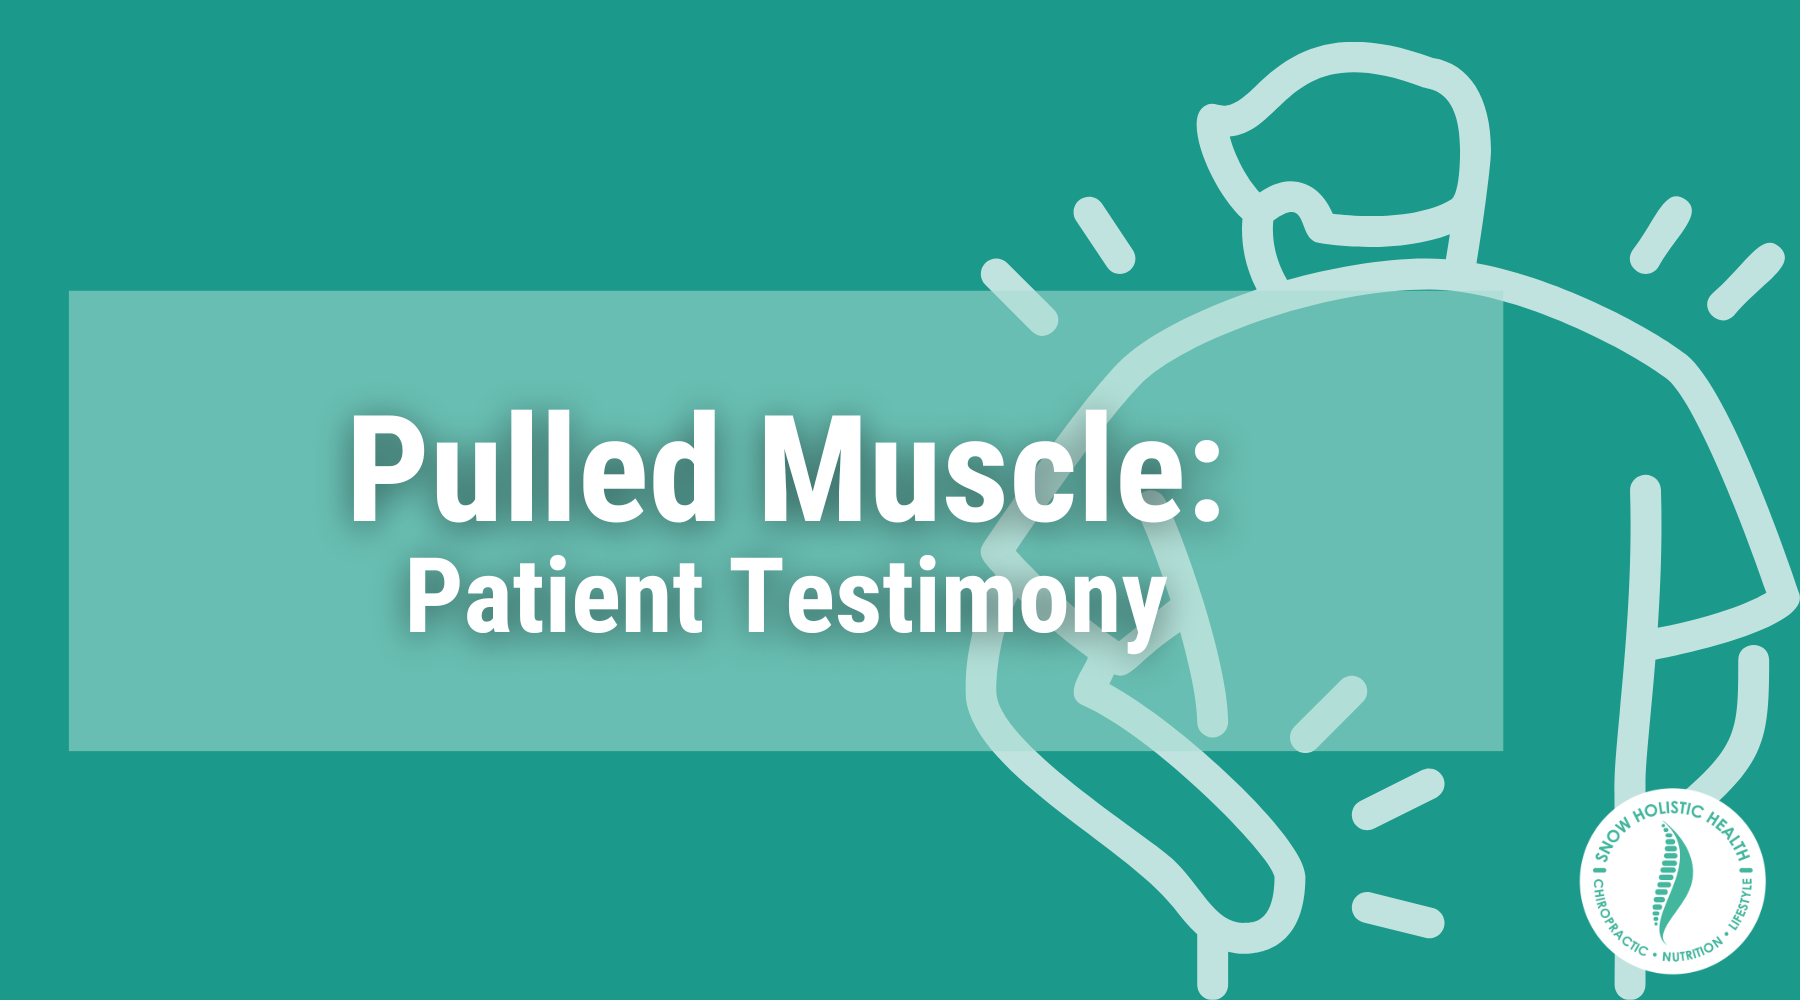 Pulled Muscle: Patient Testimony